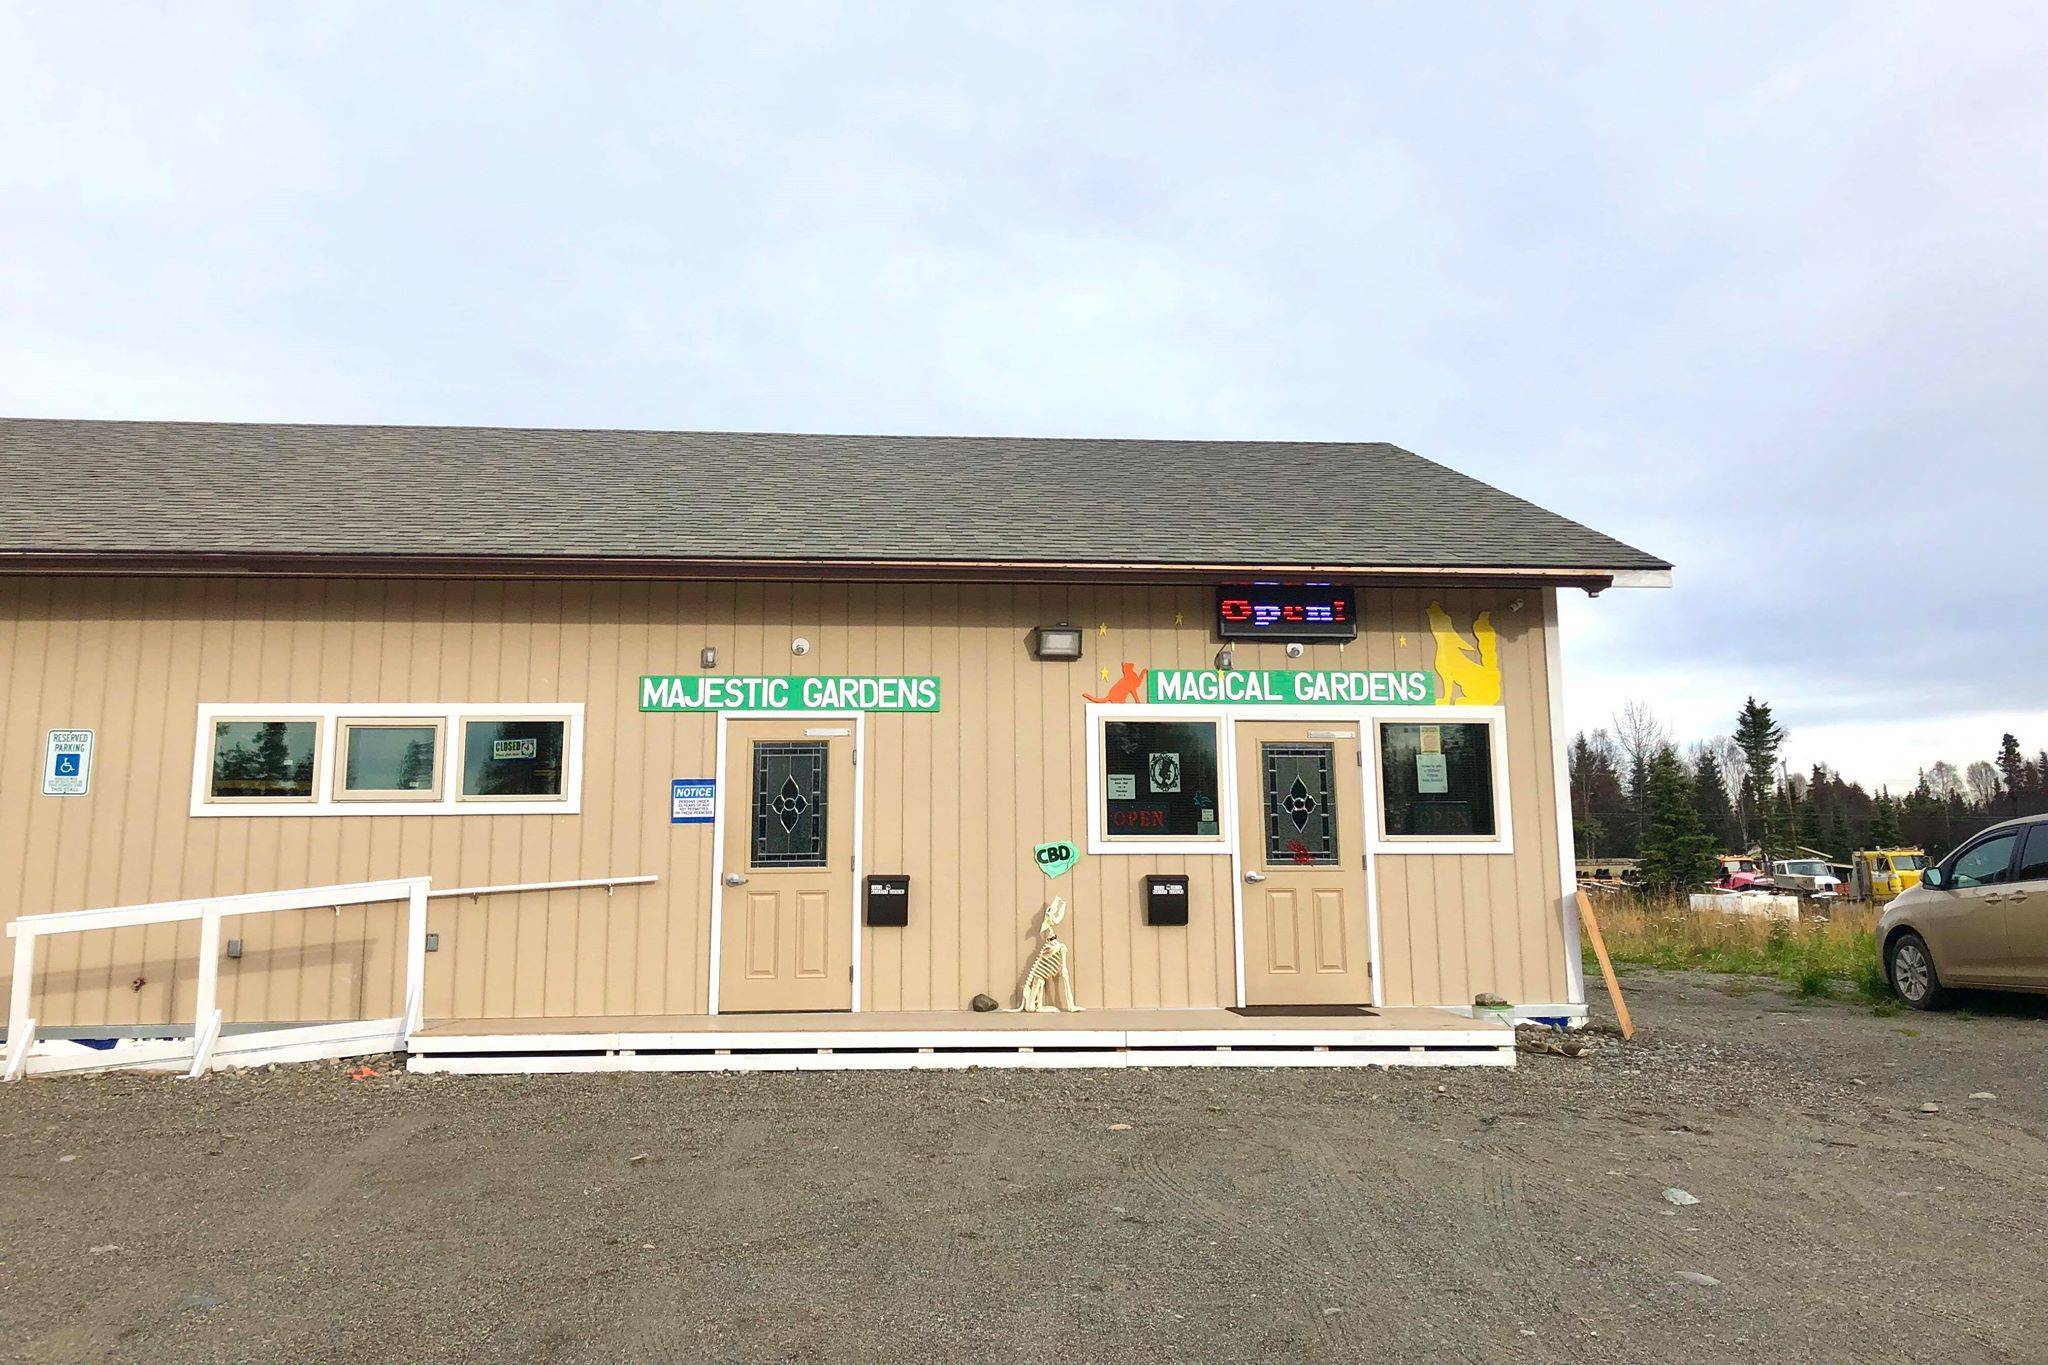 Magical Gardens, located off of the Kenai Spur Highway in Kenai, AK, specializes in CBD and hemp products for pets and people. Photographed on Monday, Oct. 22, 2018. (Photo by Victoria Petersen/Peninsula Clarion)